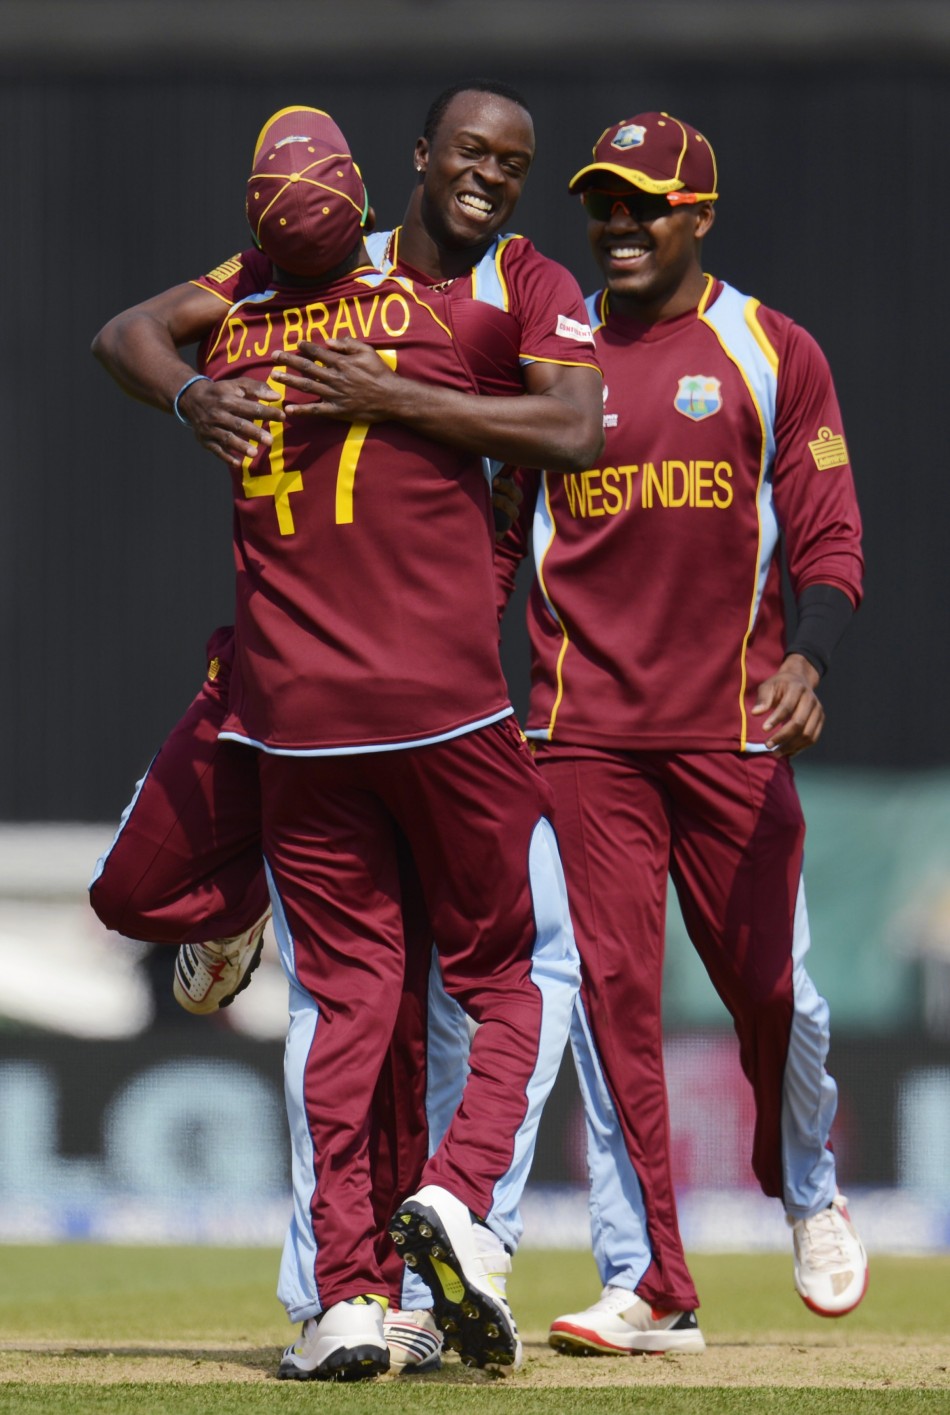 West Indies TriSeries 2013 Match Schedule, Team Standings and Match